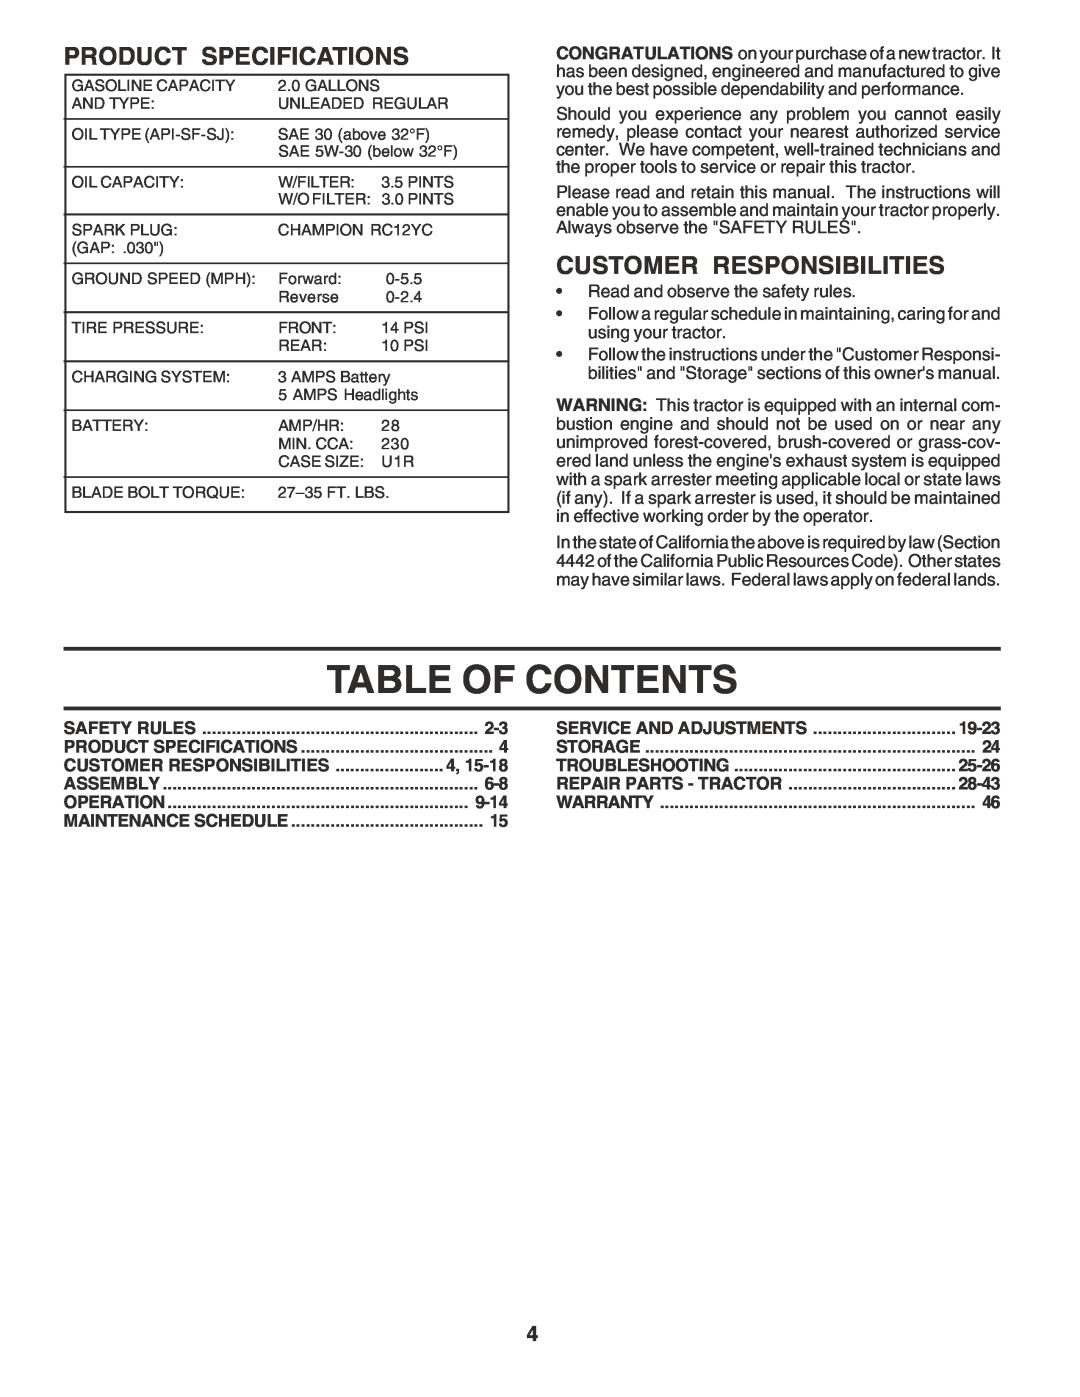 Poulan 183041 owner manual Table Of Contents, Product Specifications, Customer Responsibilities 